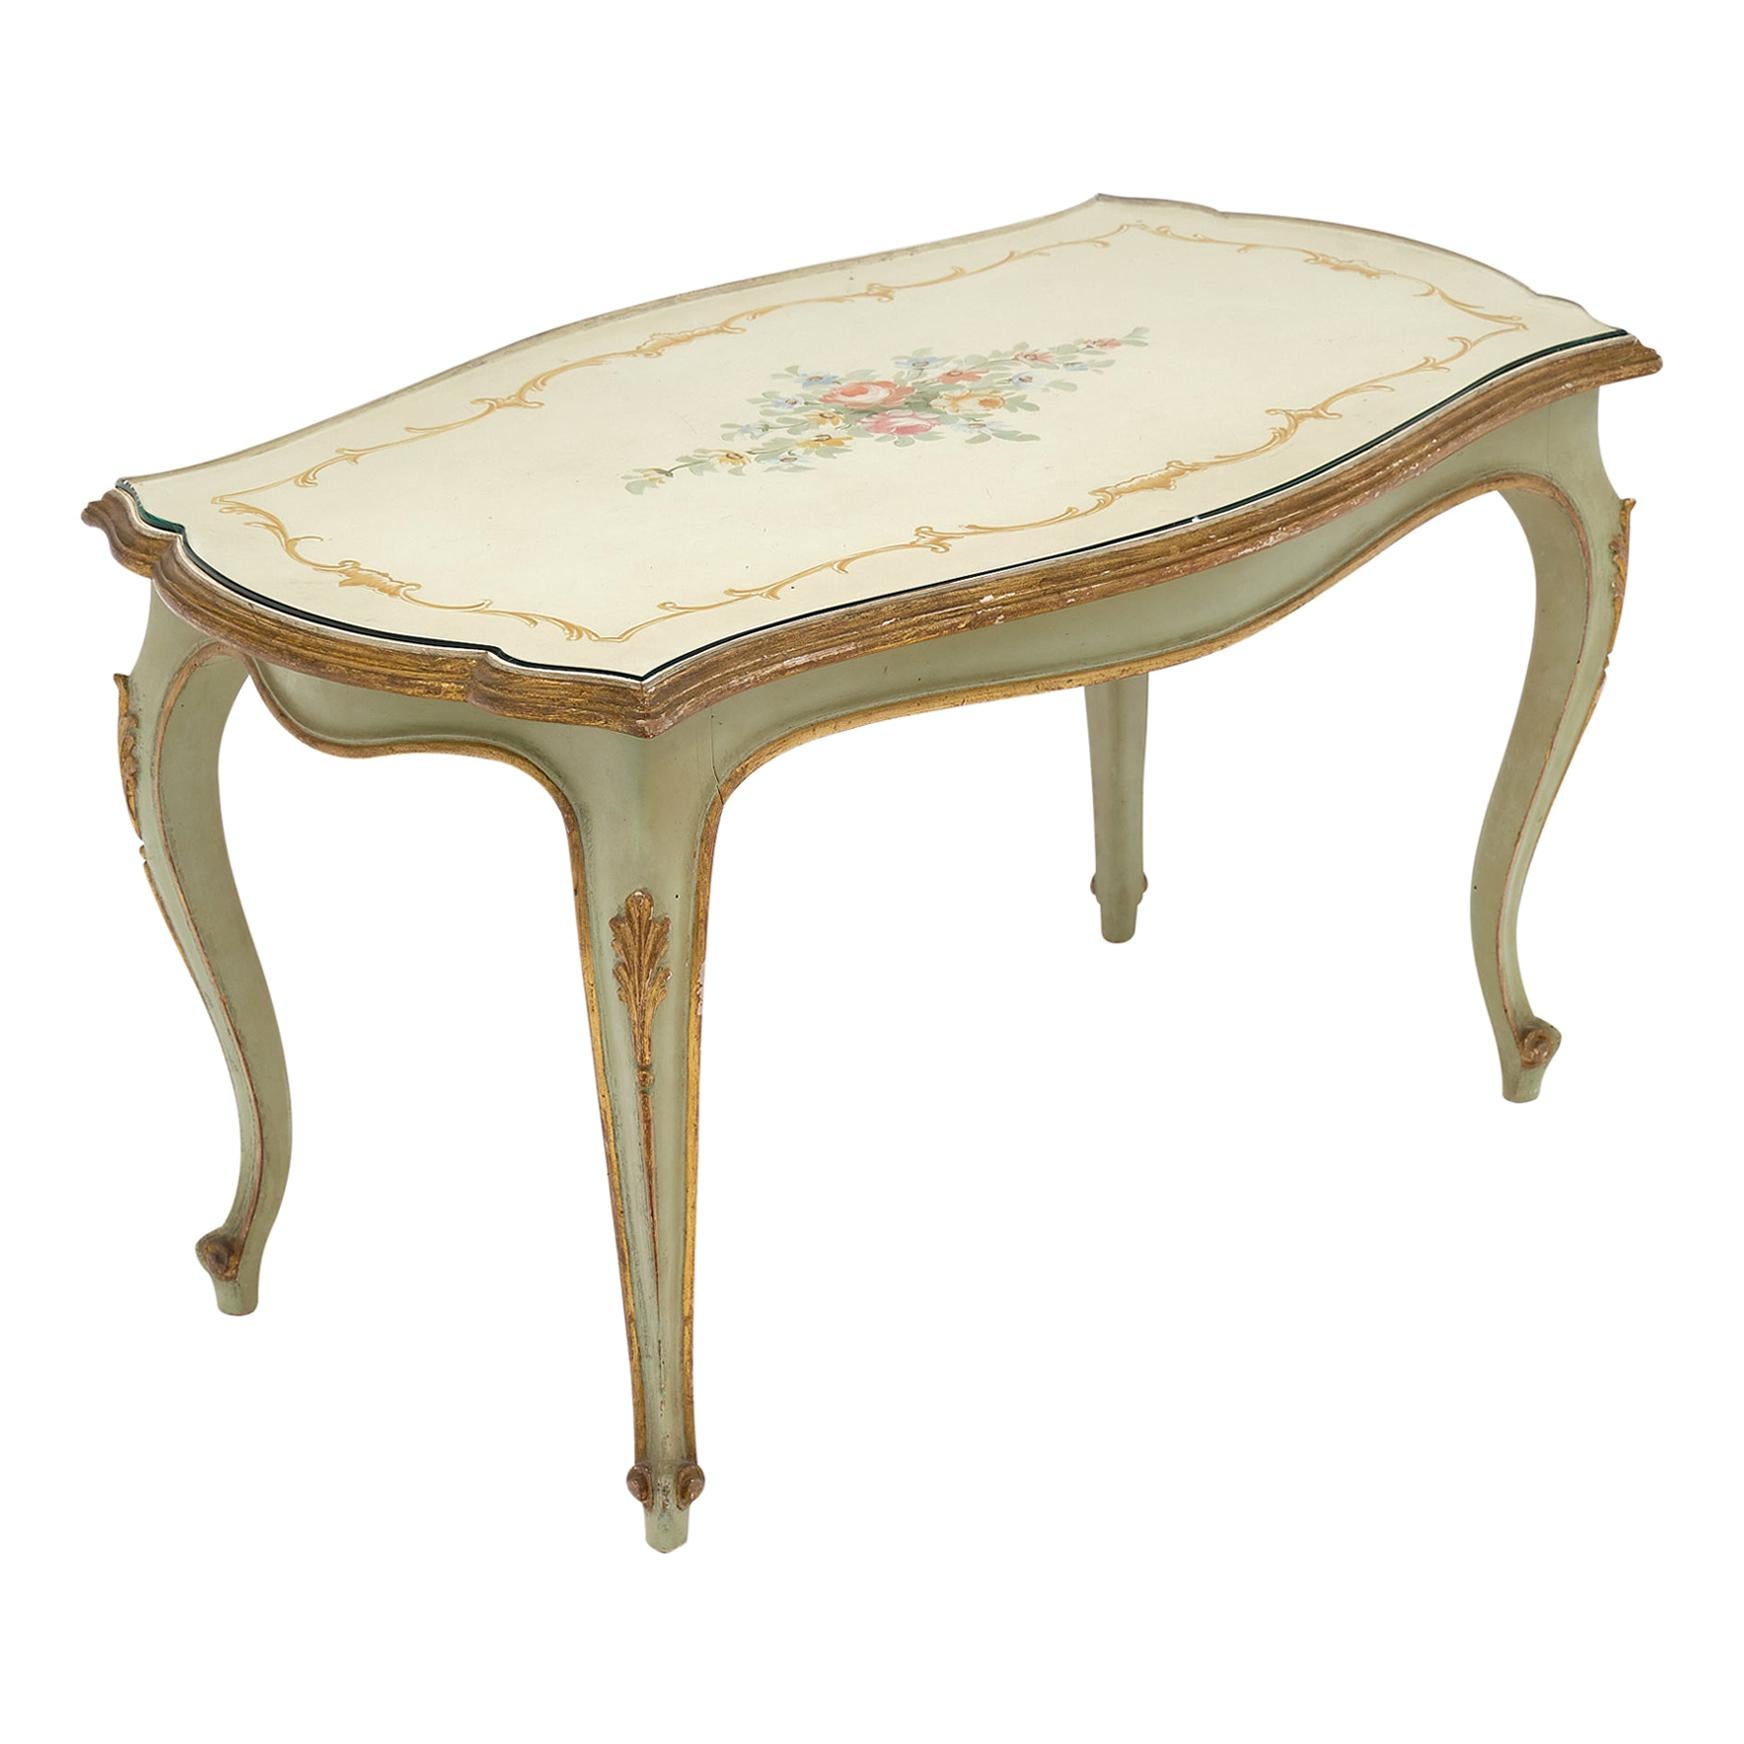 Painted Venetian Antique Coffee Table